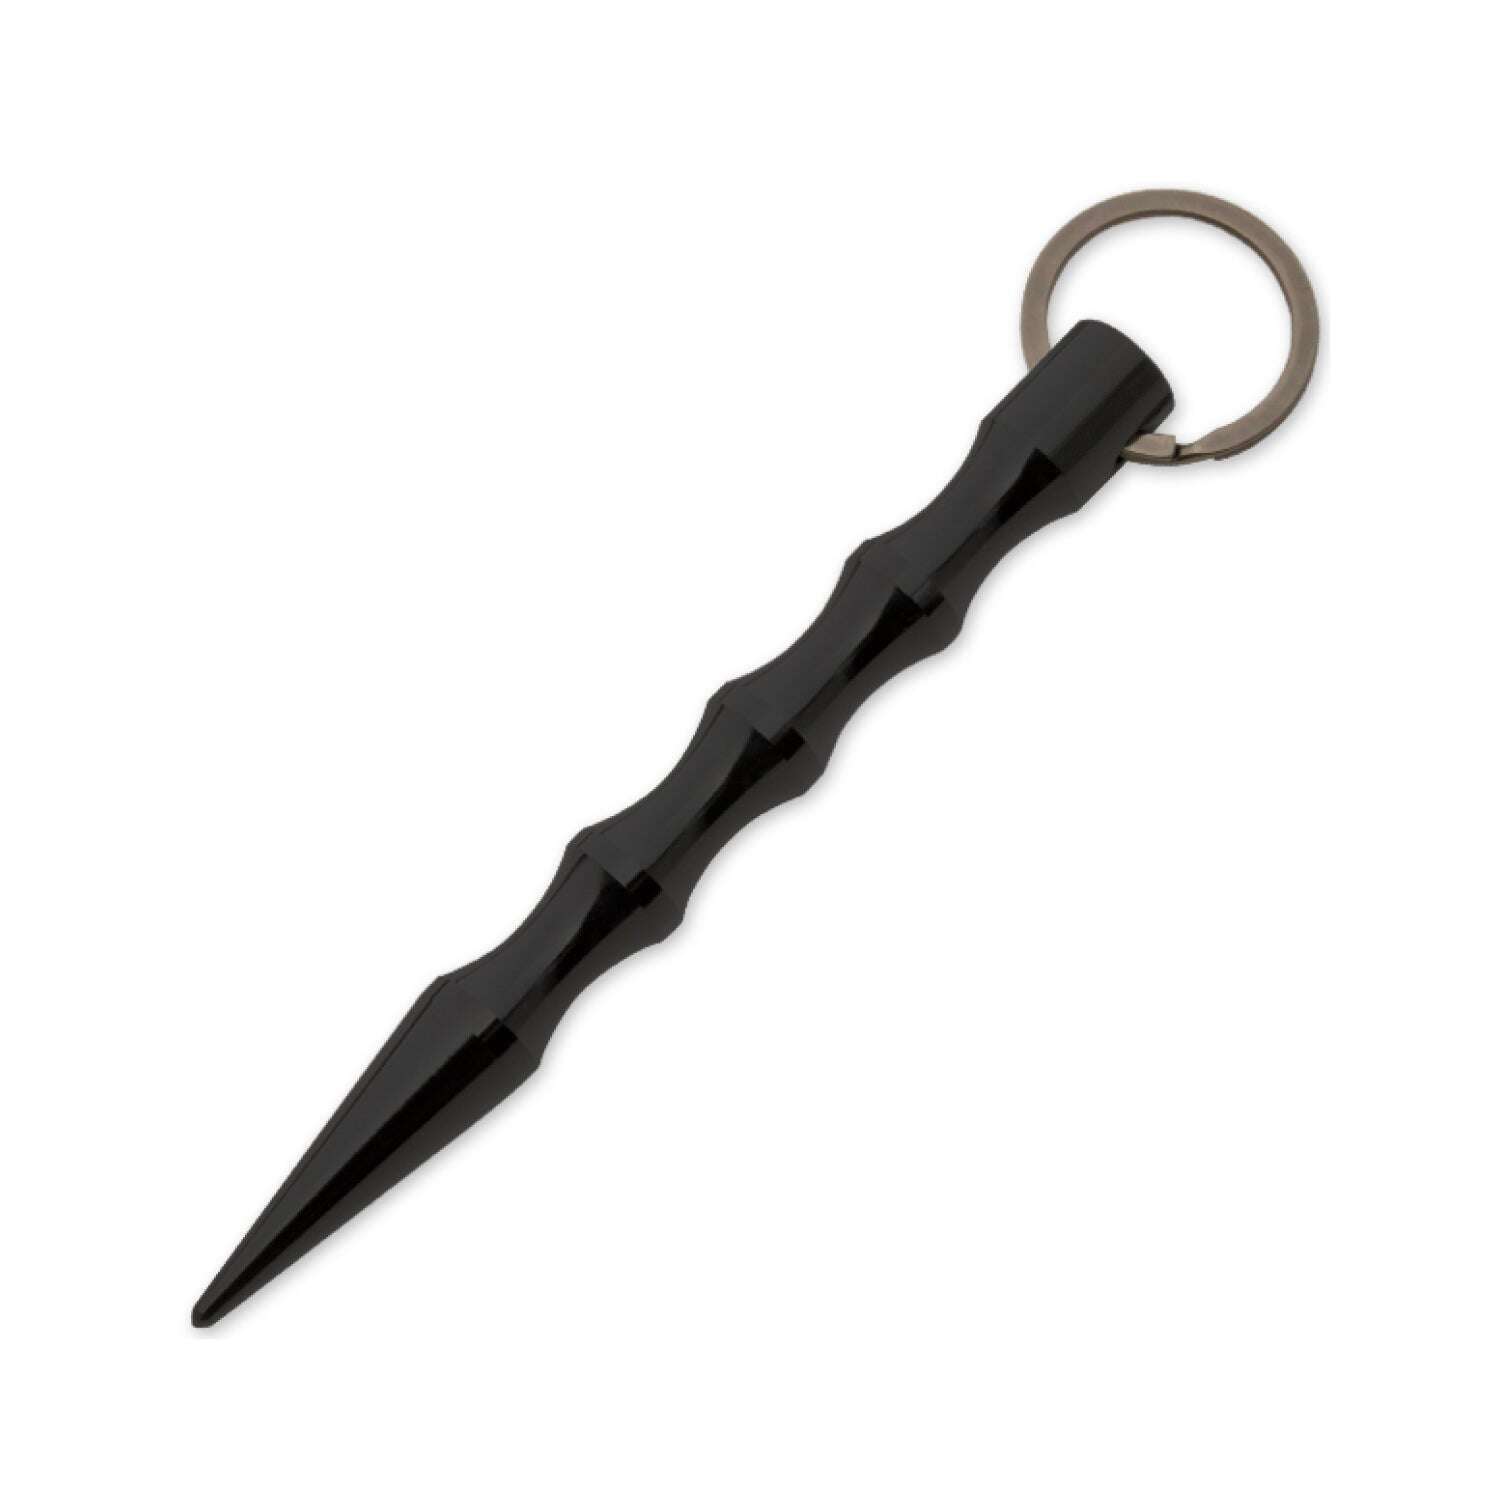 Kubotan Self Defense Keychain - Protect Yourself with Non-Lethal Force